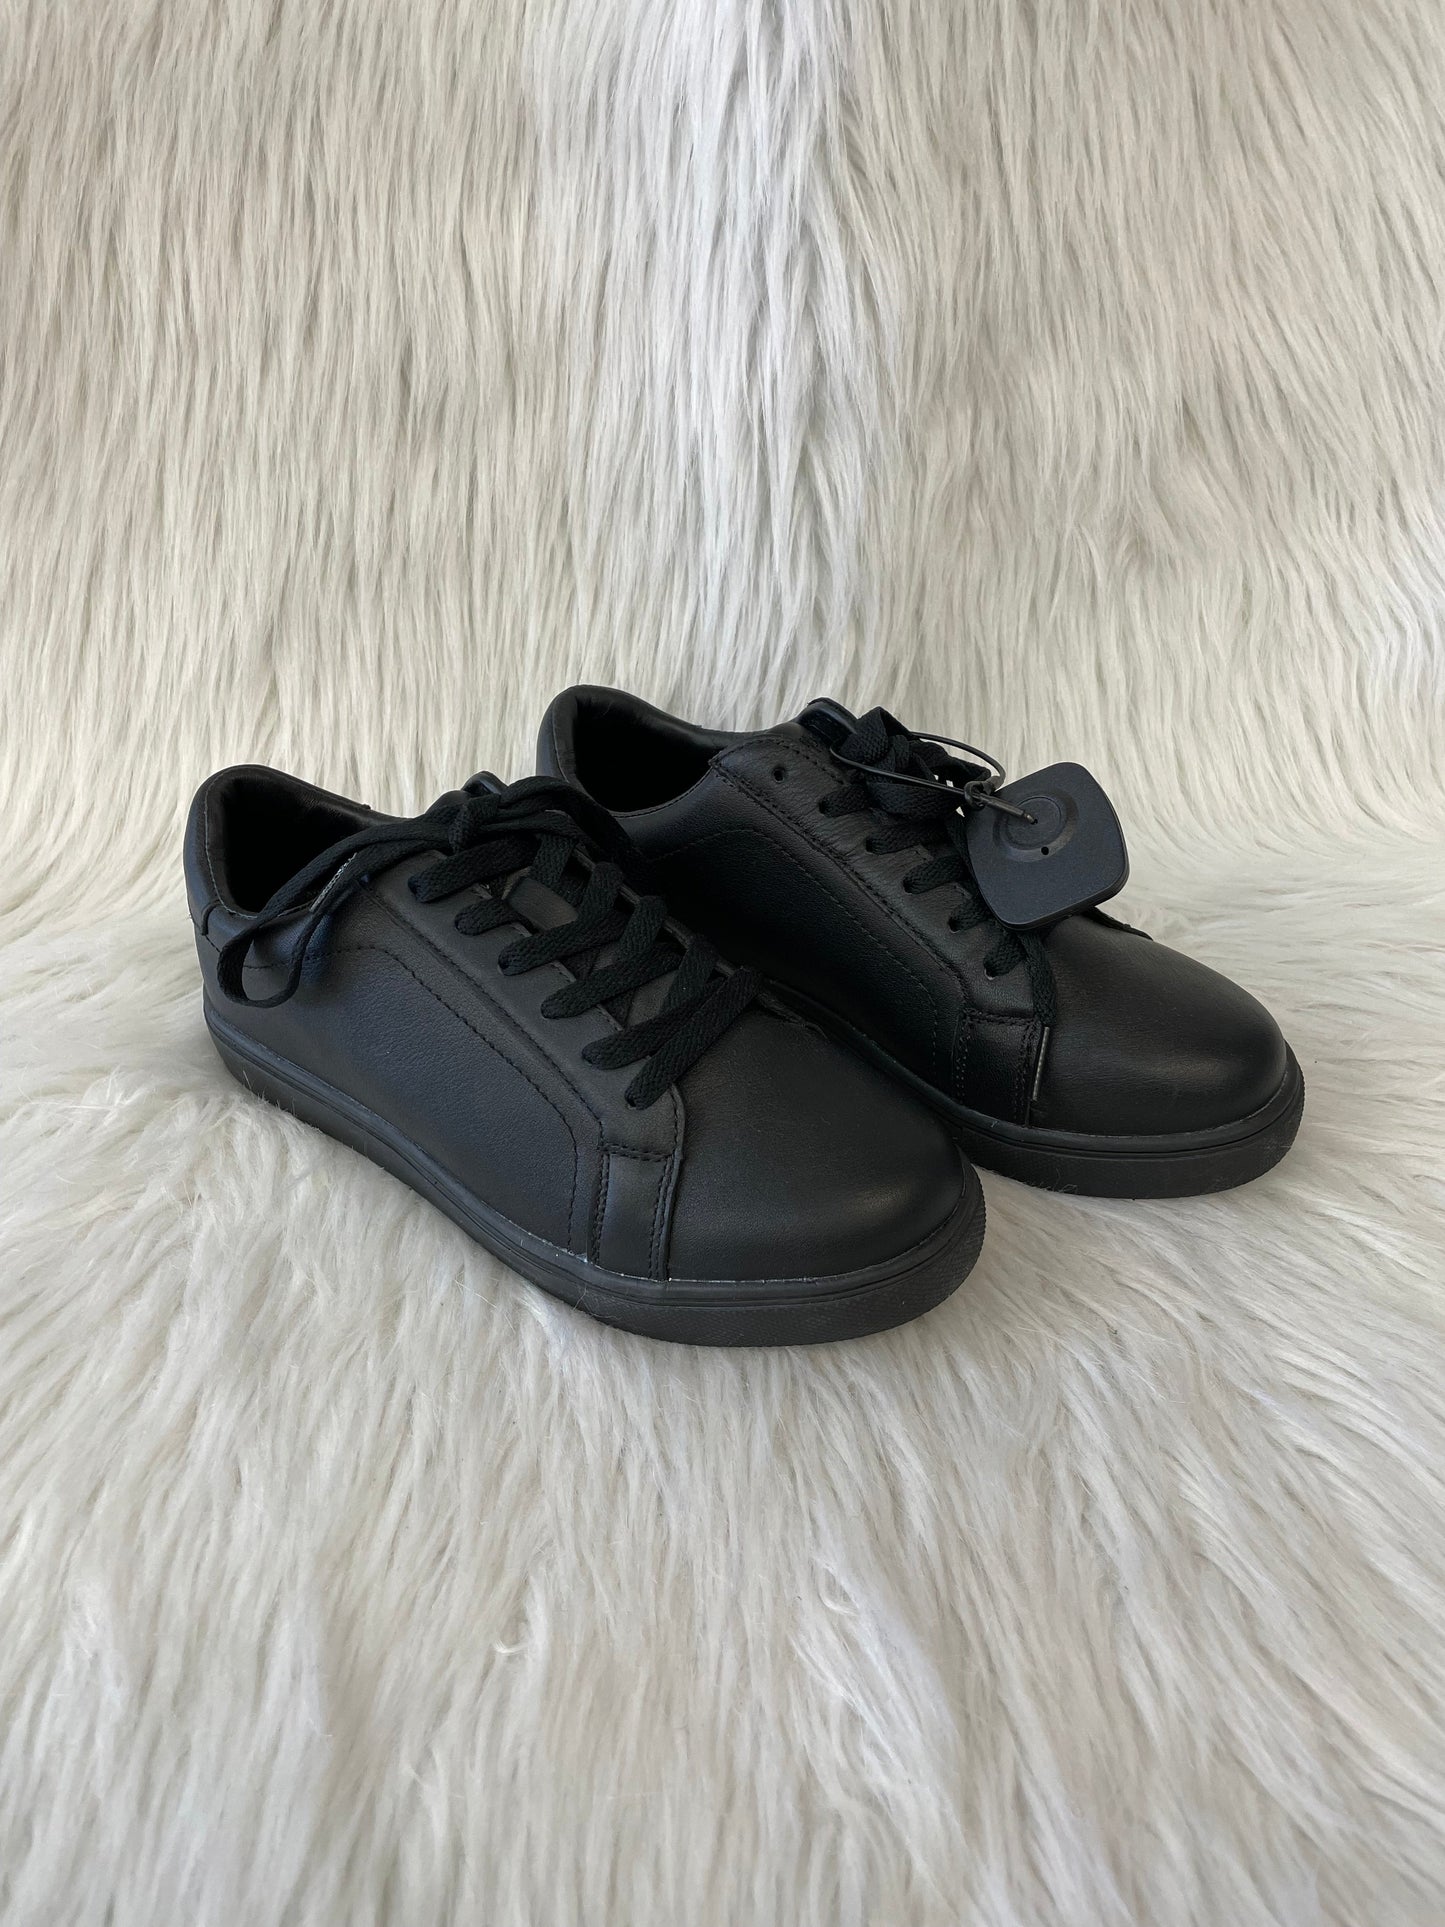 Black Shoes Sneakers Cmc, Size 6.5